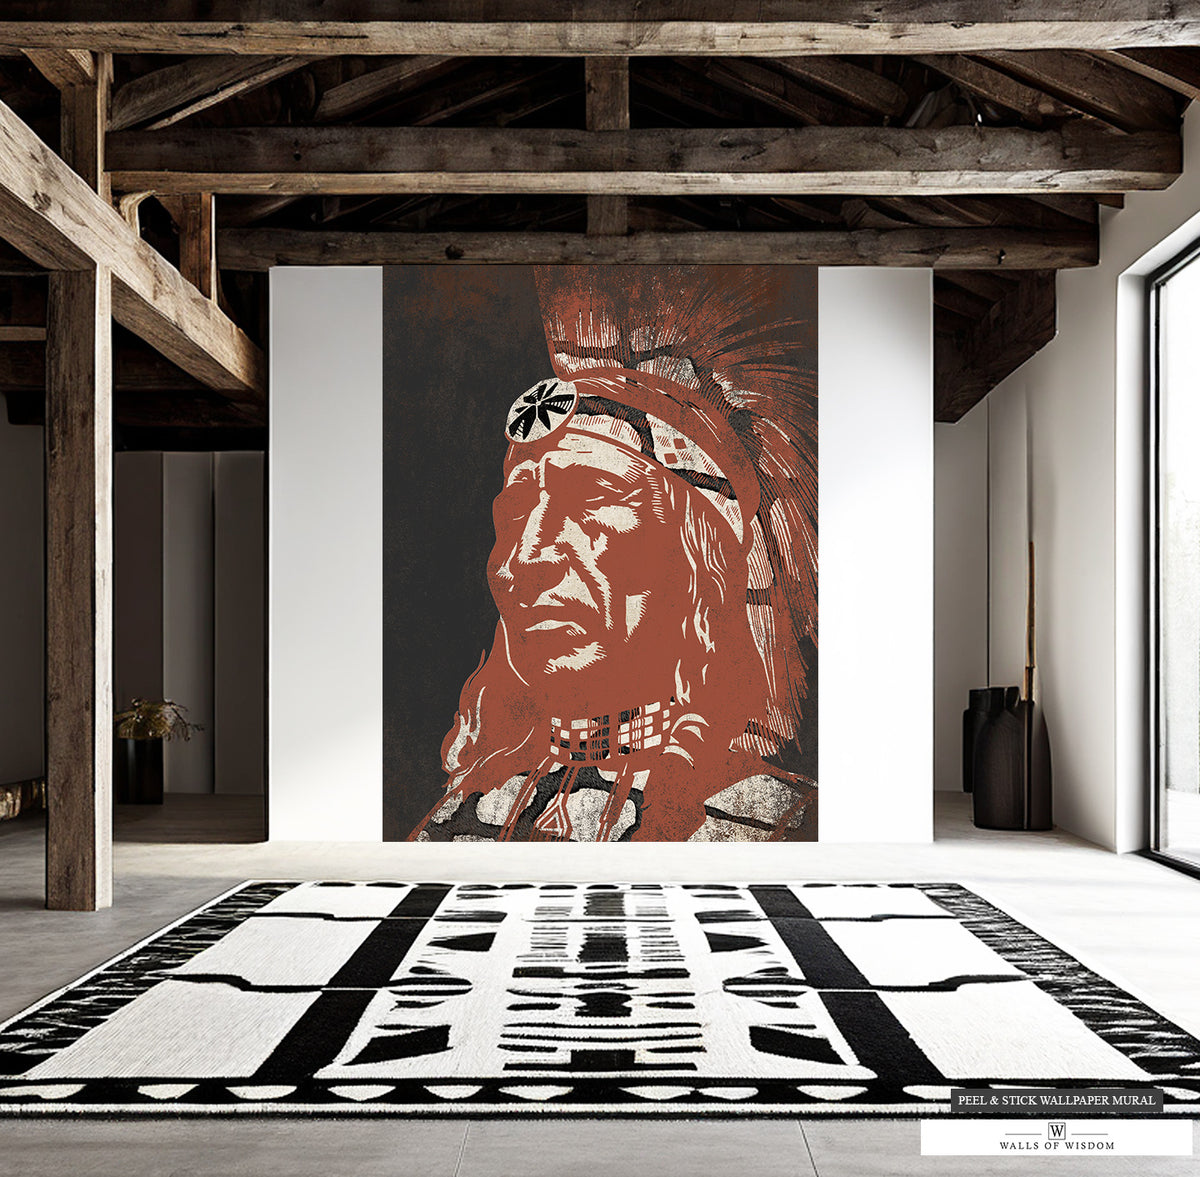 Western decor meets contemporary art in this Native American Indian Chief mural.